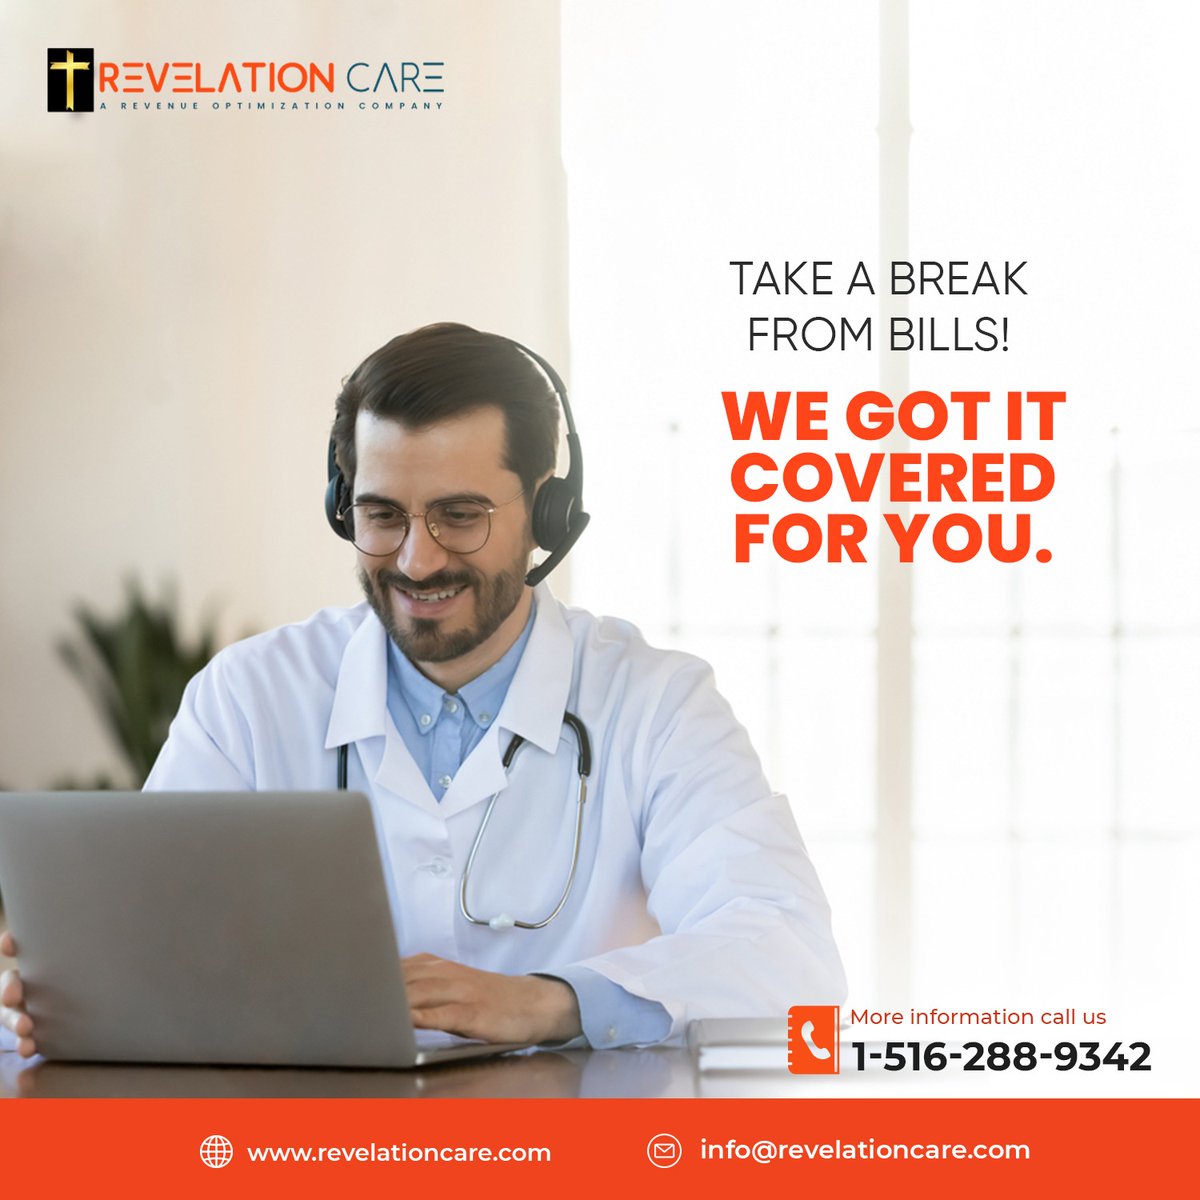 Efficient medical billing boosts revenue, minimizes errors, and lets you focus on quality care. Revelation Care supports you!

#debtrelief #FinancialFreedom #medicaldebt #financialplanning #financialwellbeing #insuranceclaims #financialempowerment #medicaid #medicalbilling #rcm